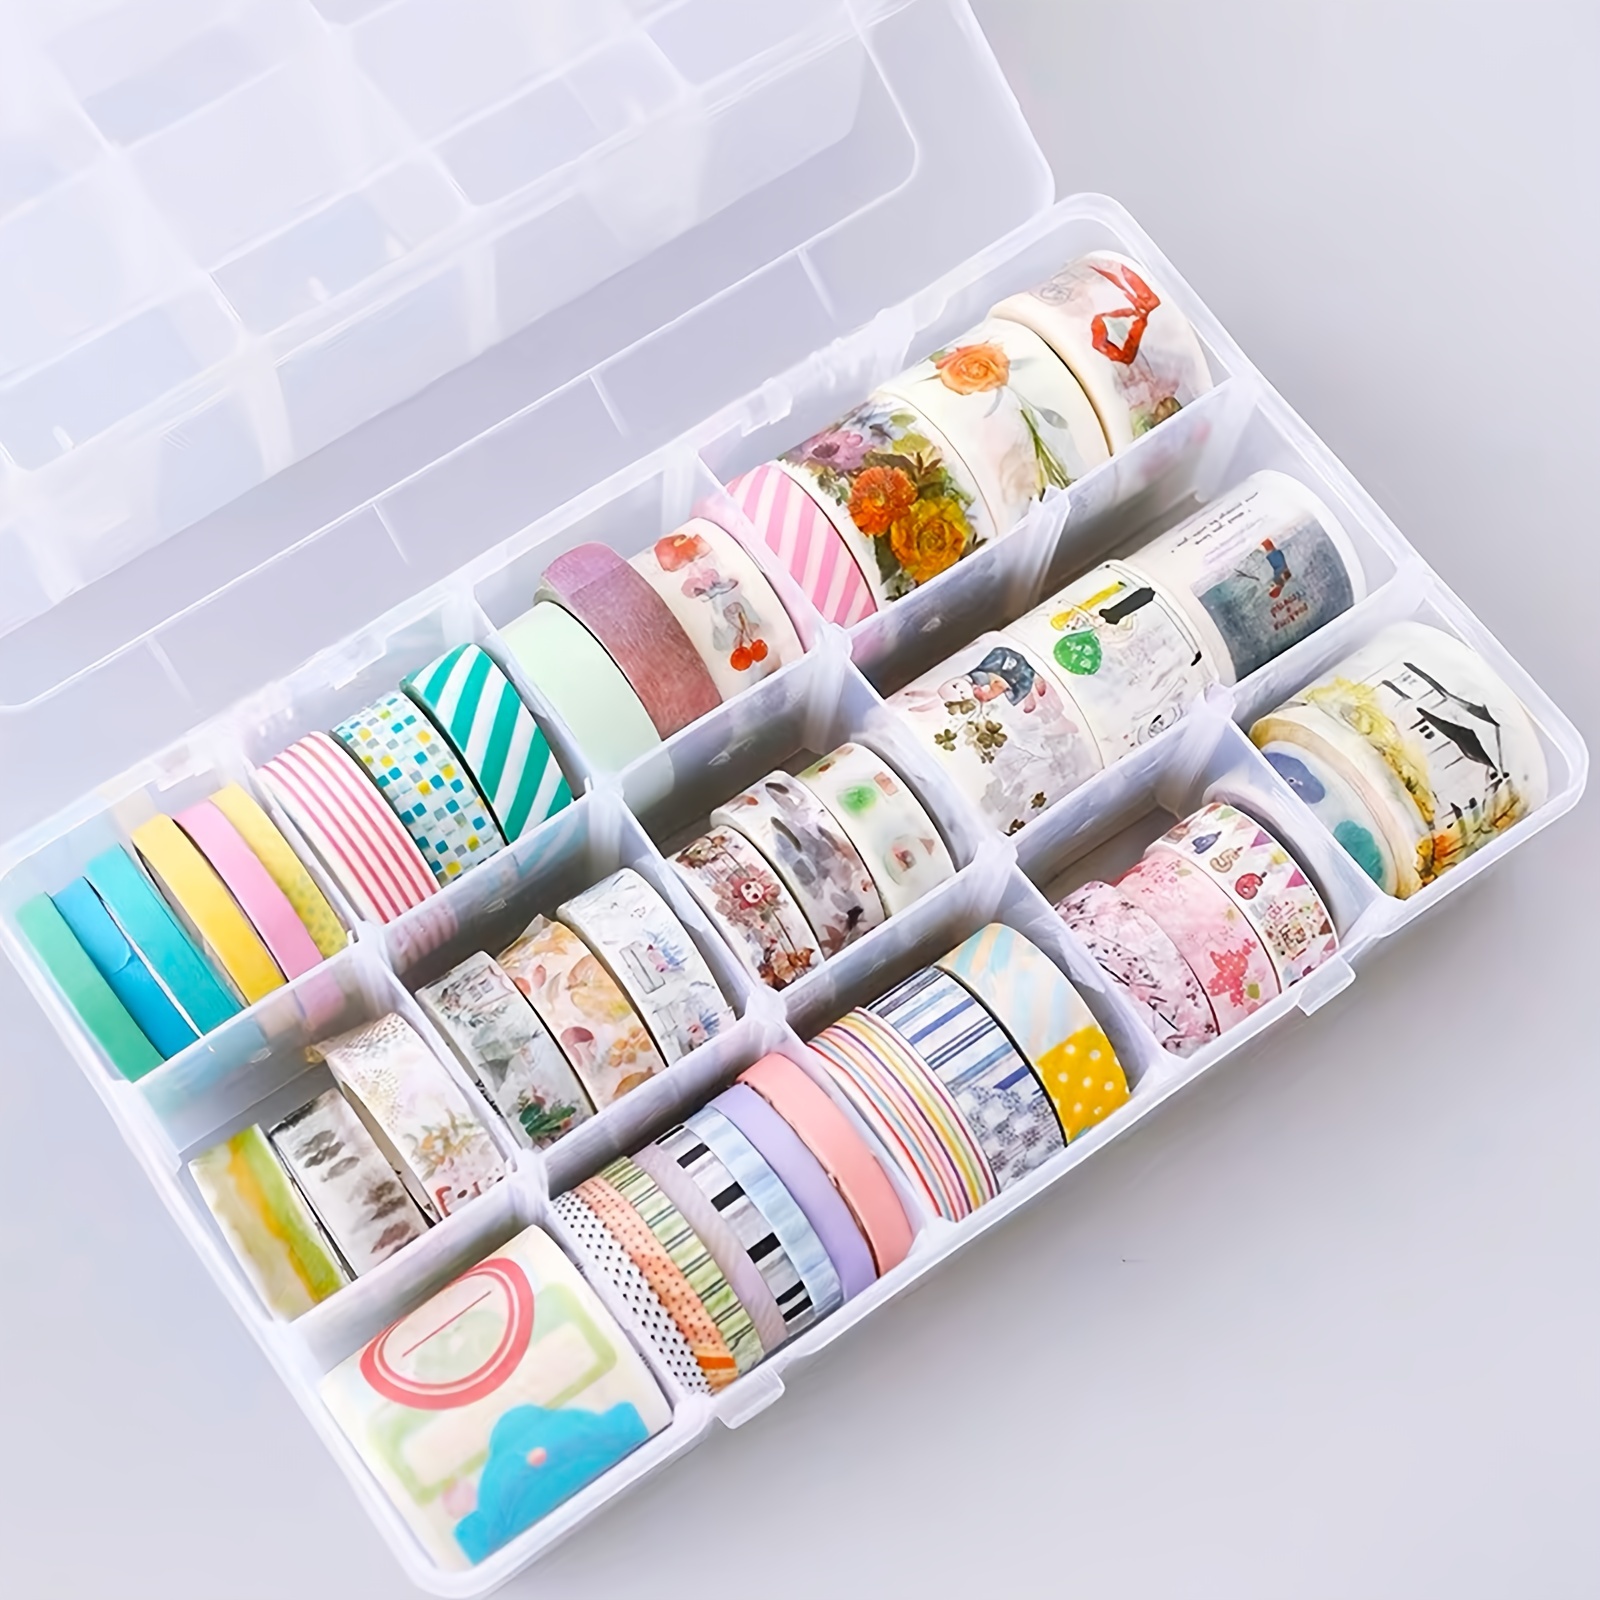  BTremary 15 Grids Clear Plastic Storage Box with Compartment,  Craft Organizers and Storage, Transparent Jewelry Storage Box, Small Parts  Organizer for Sewing Bead Washi Tape Thread.